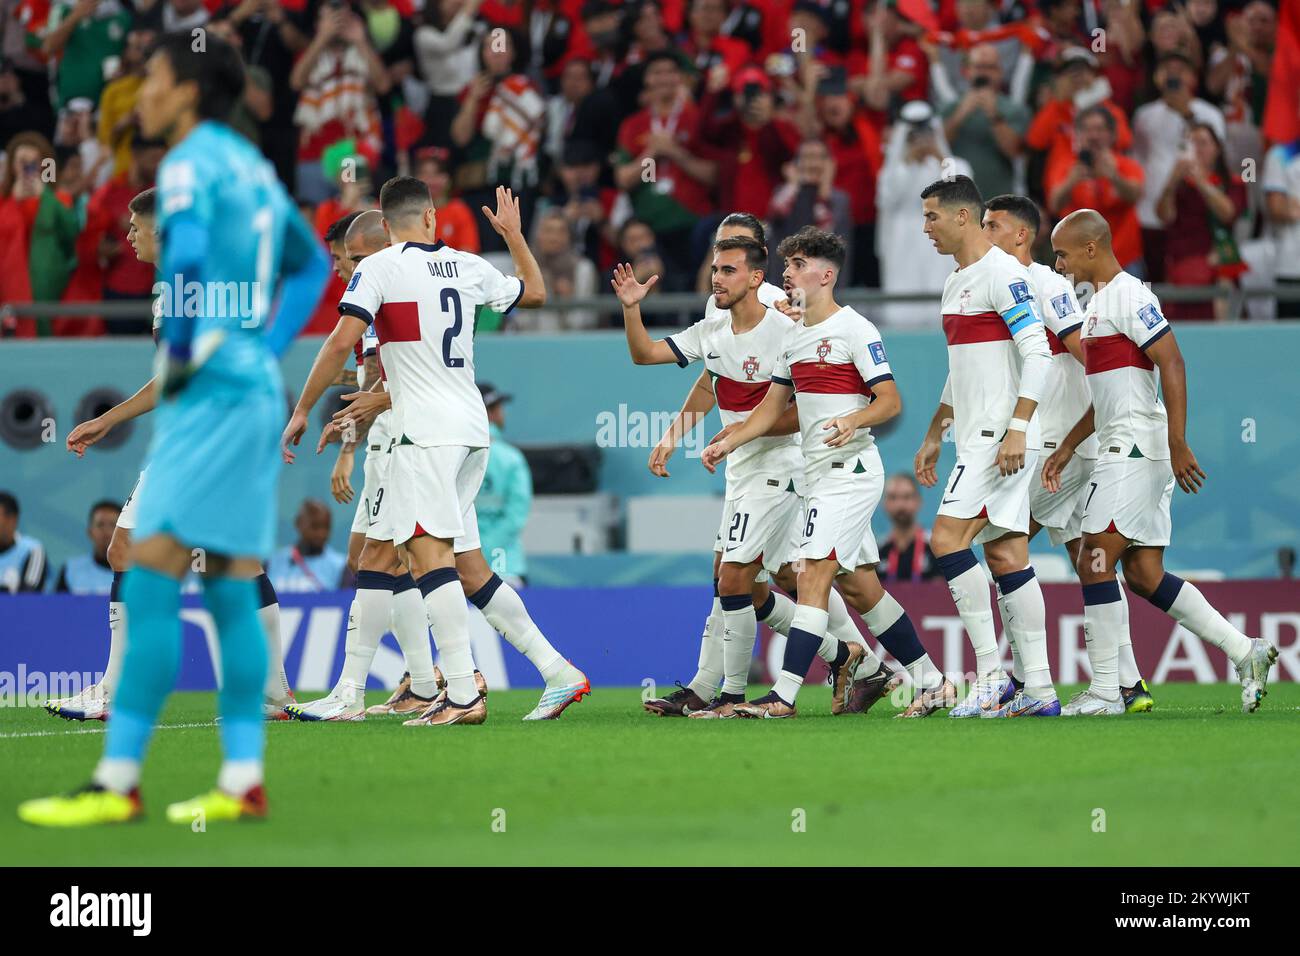 Doha, Qatar. 02nd Dec, 2022. Portugal national team players celebrate Ricardo Horta's goal during a match against South Korea in Group H of the FIFA World Cup Qatar 2022 between South Korea and Portugal at the Stadium Education City in Doha, Qatar. December 2. Credit: Brazil Photo Press/Alamy Live News Stock Photo